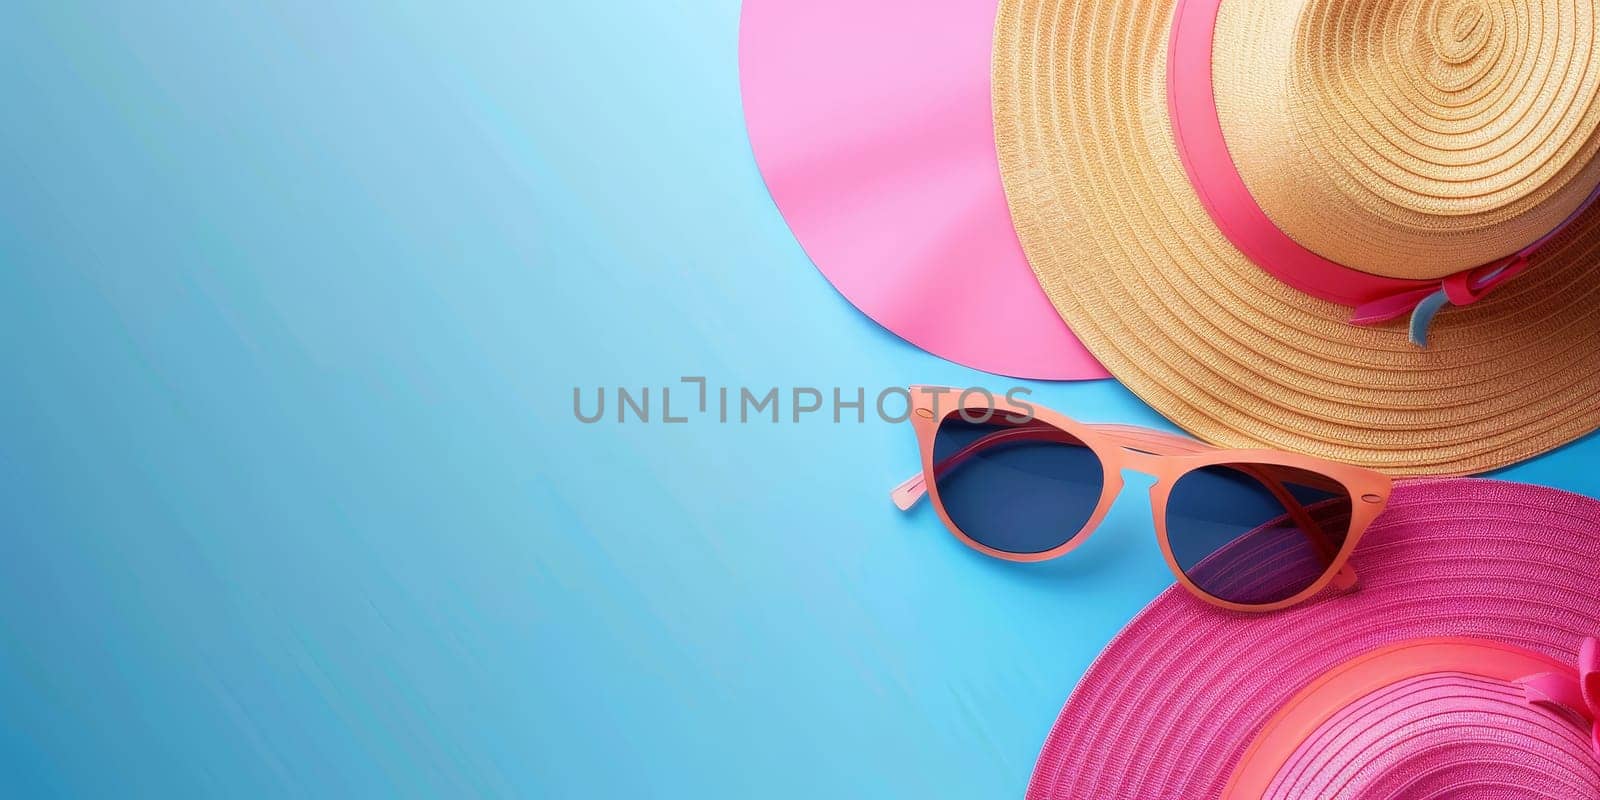 A blue background with a pink and yellow hat and sunglasses on top of it